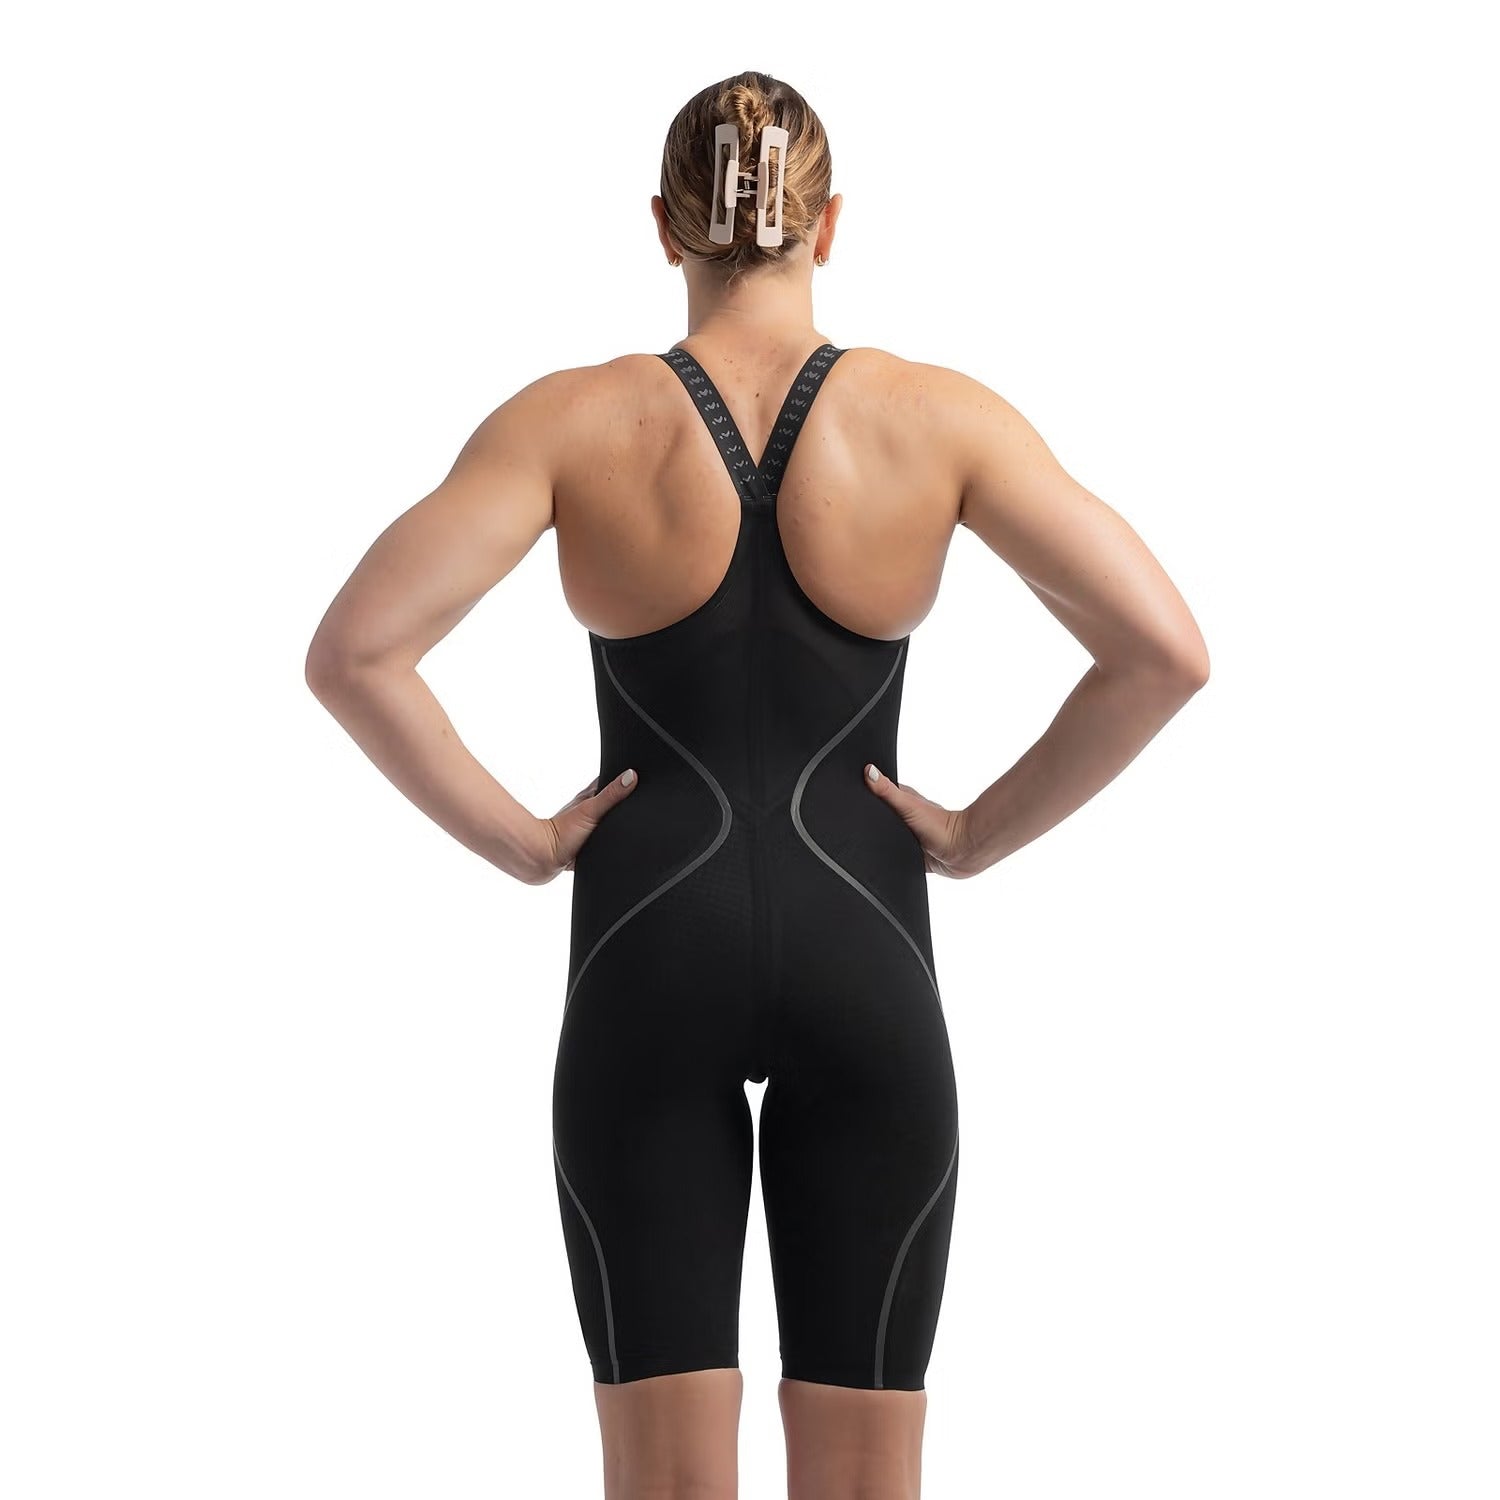 Speedo Fastskin LZR Pure Intent 2.0 Closedback Kneeskin Technical Suit - East Valley Sports Technical SuitTechnical Suit